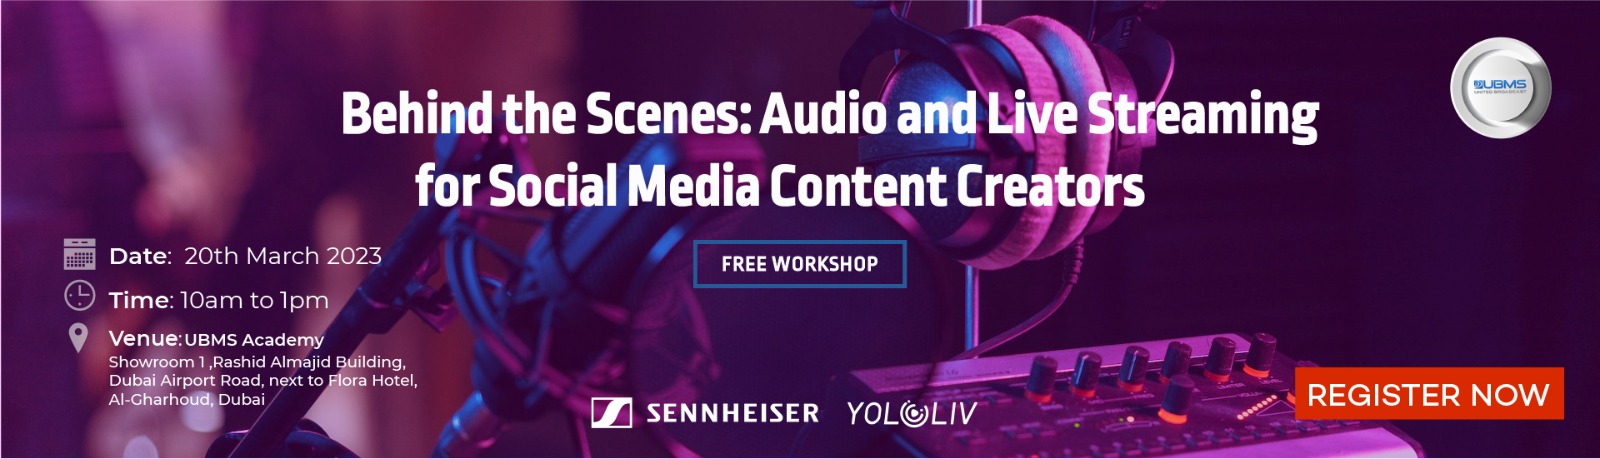 Behind the Scenes: Audio and Live Streaming for Social Media Content Creators